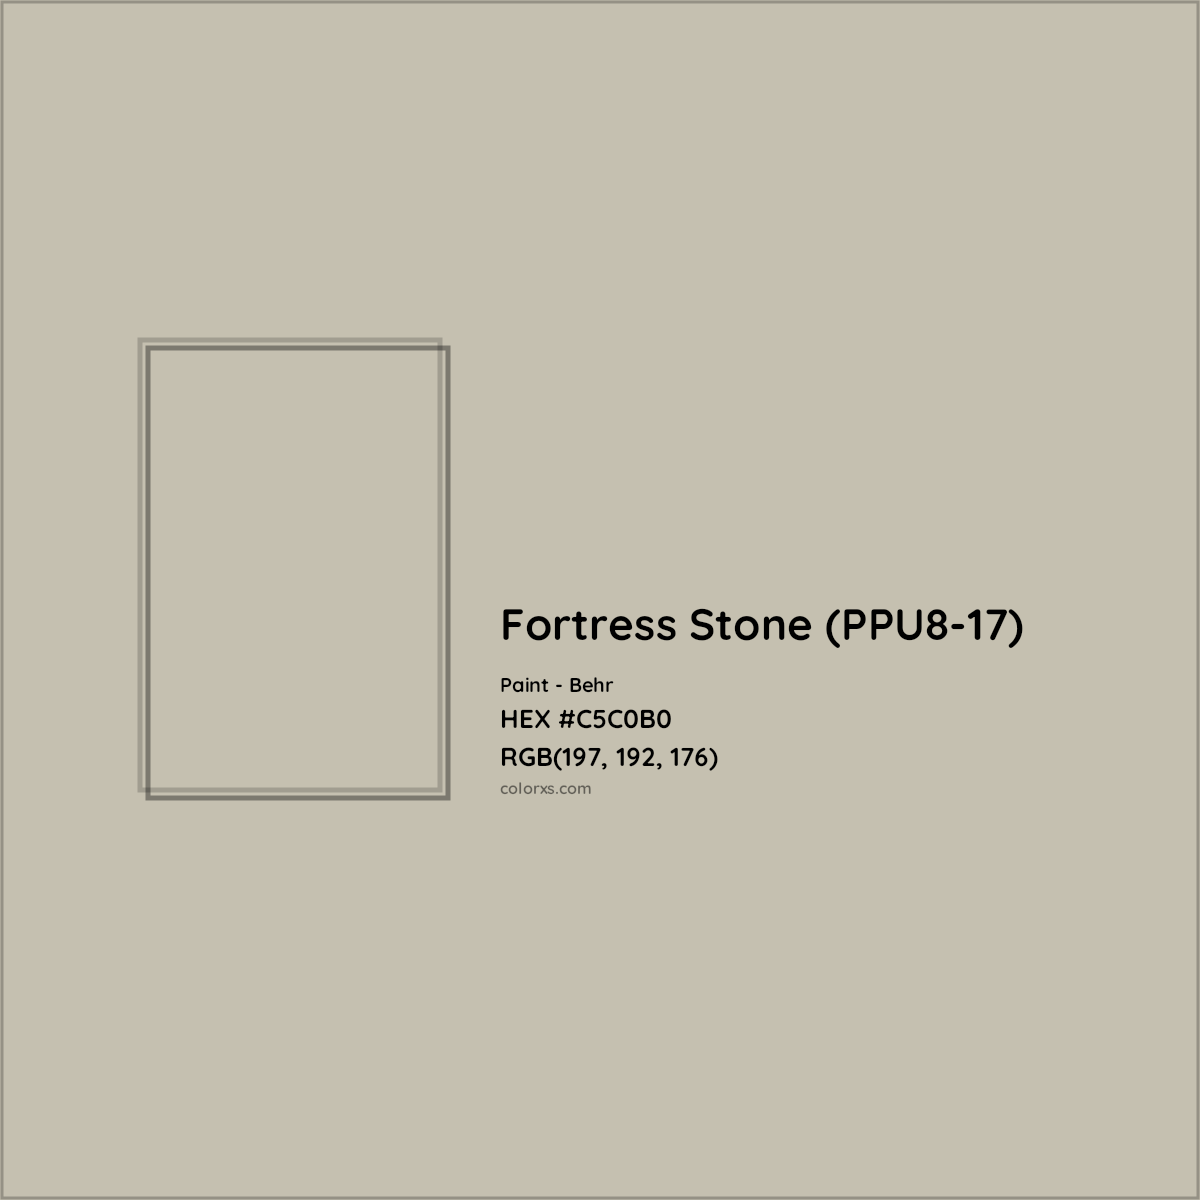 HEX #C5C0B0 Fortress Stone (PPU8-17) Paint Behr - Color Code